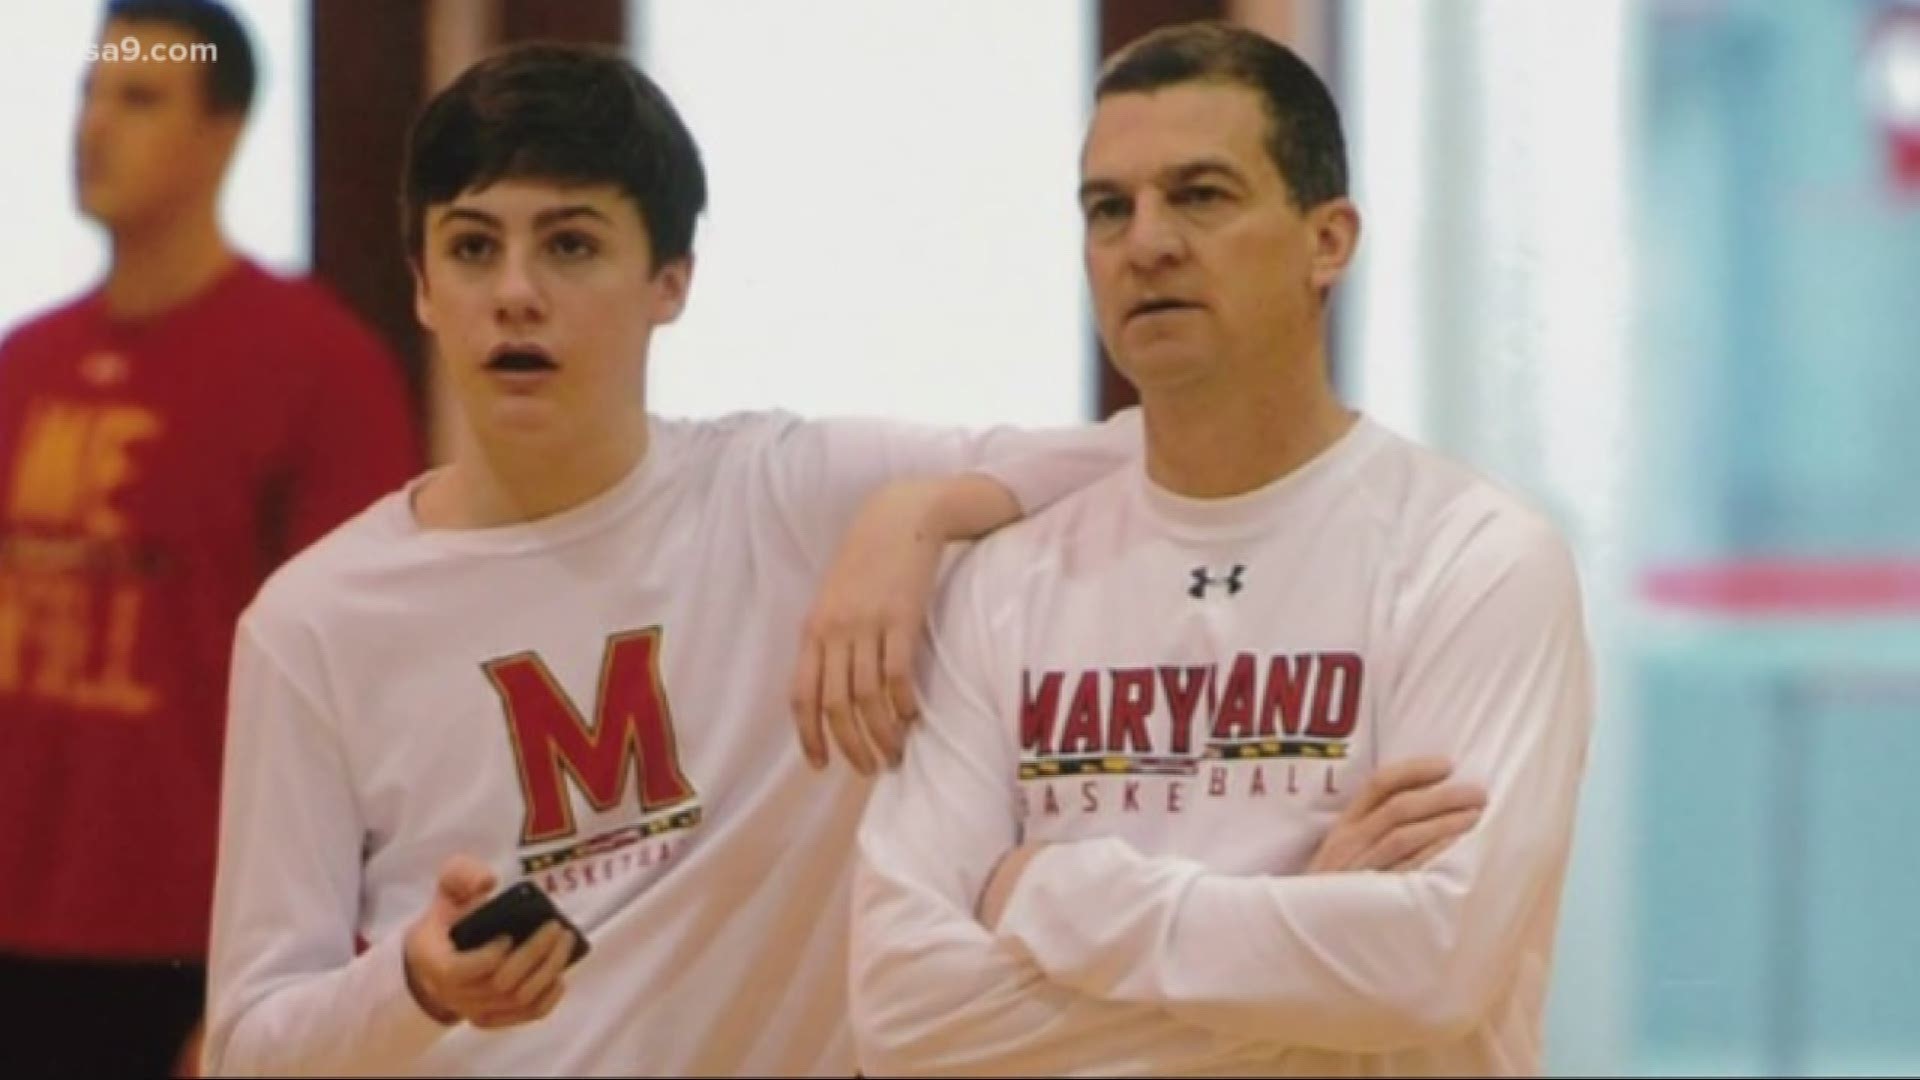 Though Mark Turgeon coaches a Division I team, his son Will plays for a smaller Division III school.